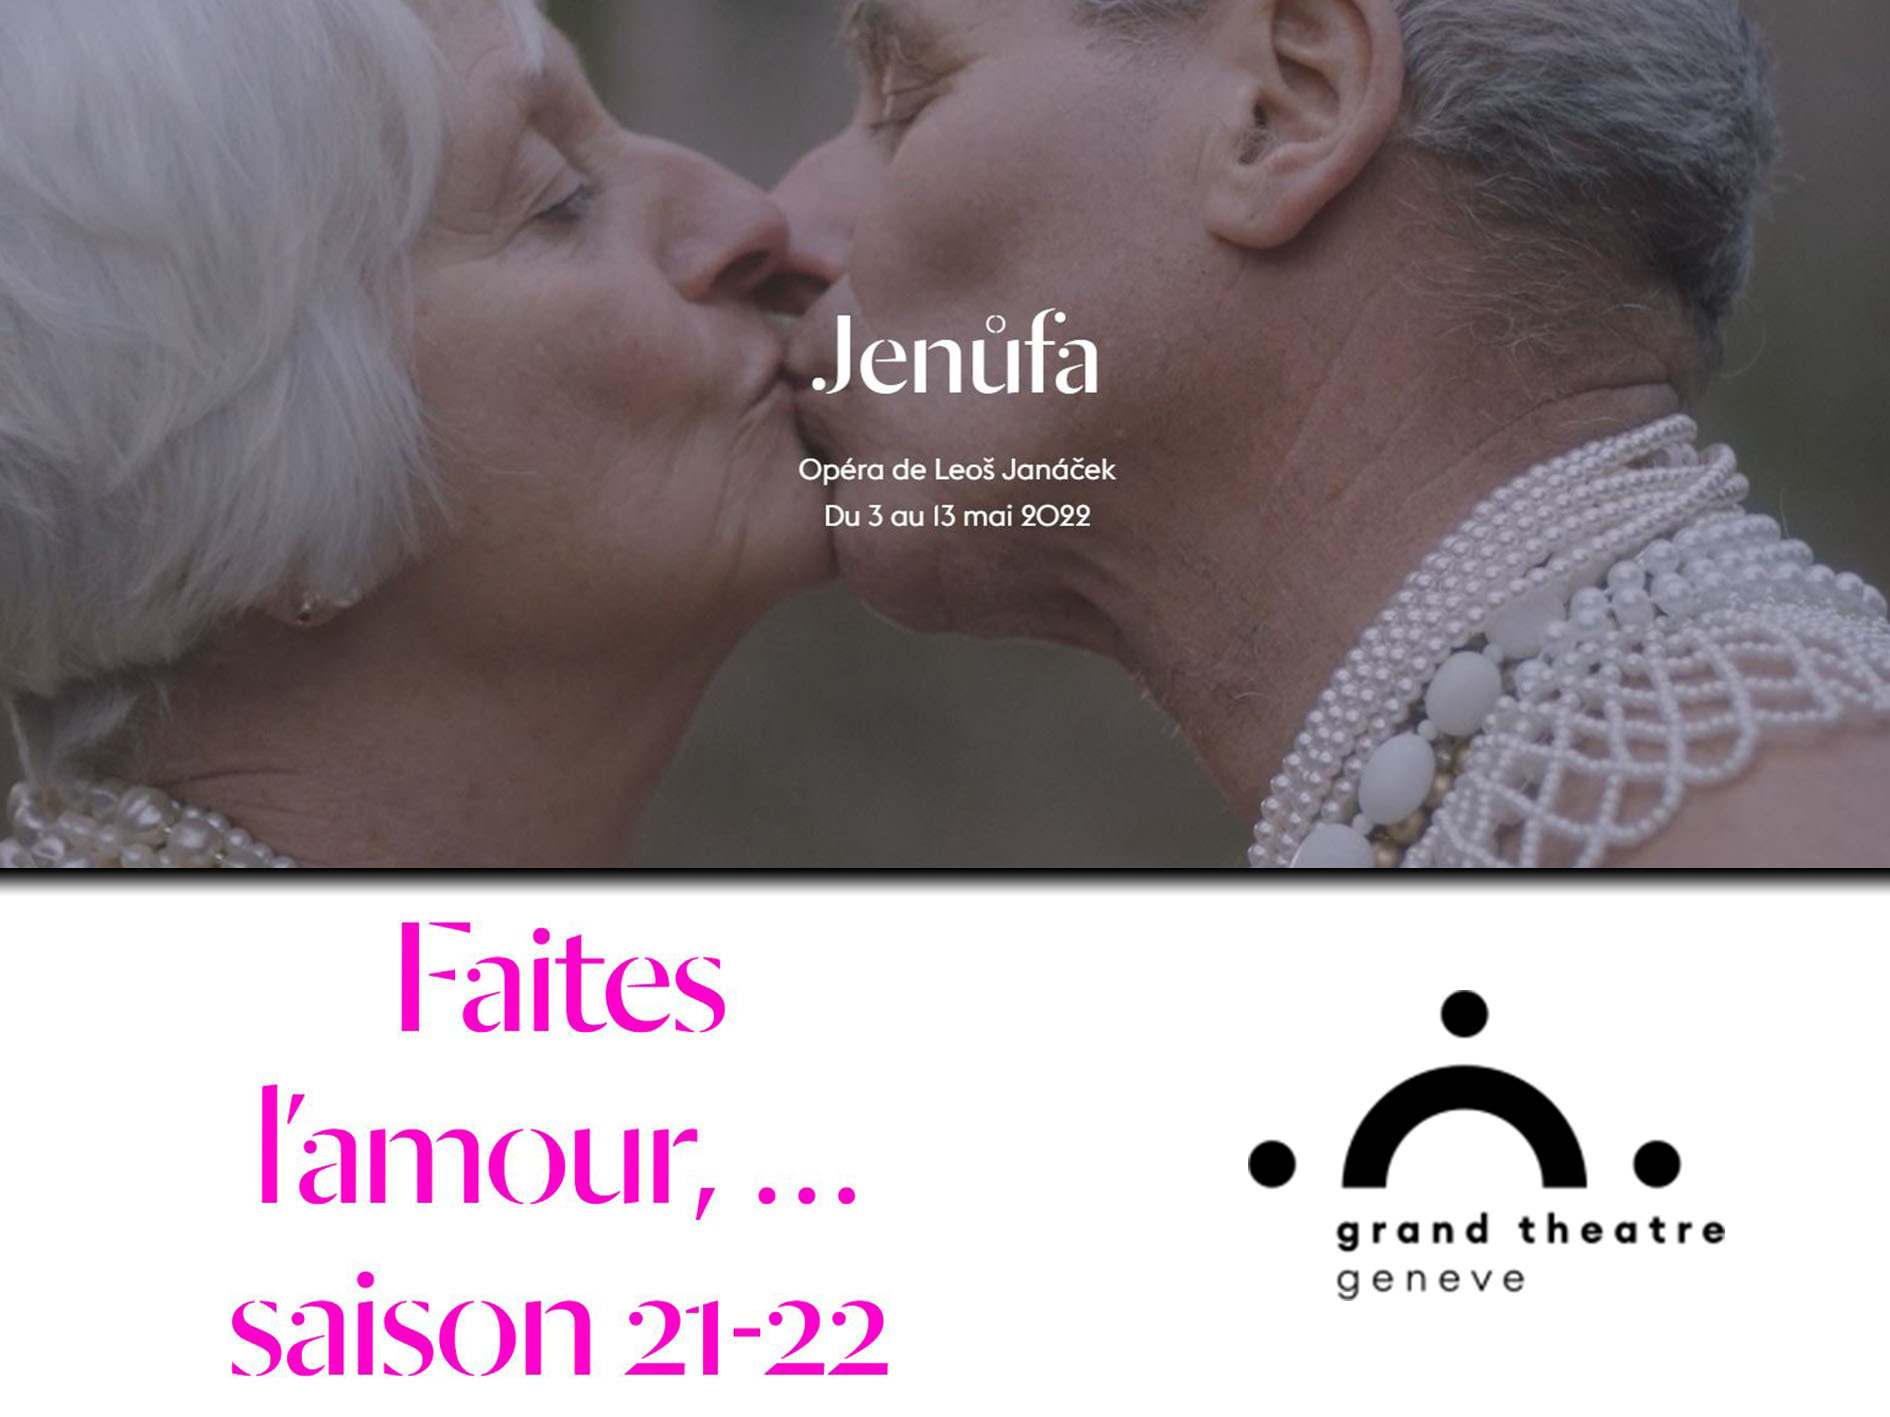 Genève Dating Events